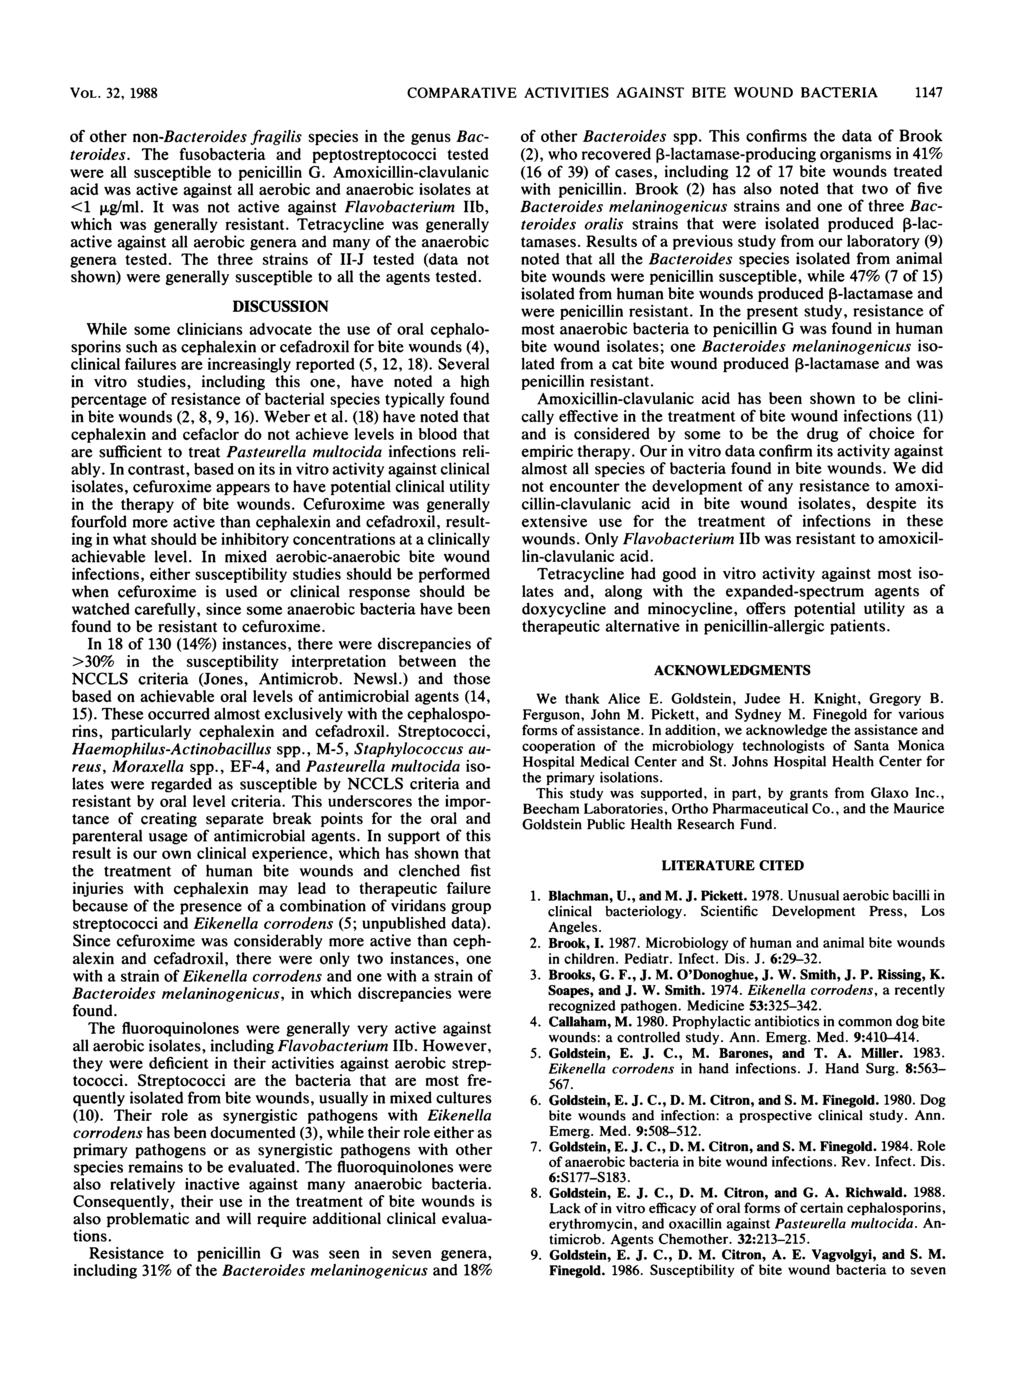 VOL., 1988 COMPARATIVE ACTIVITIES AGAINST BITE WOUND BACTERIA 1147 of other non-bacteroides fragilis species in the genus Bacteroides.